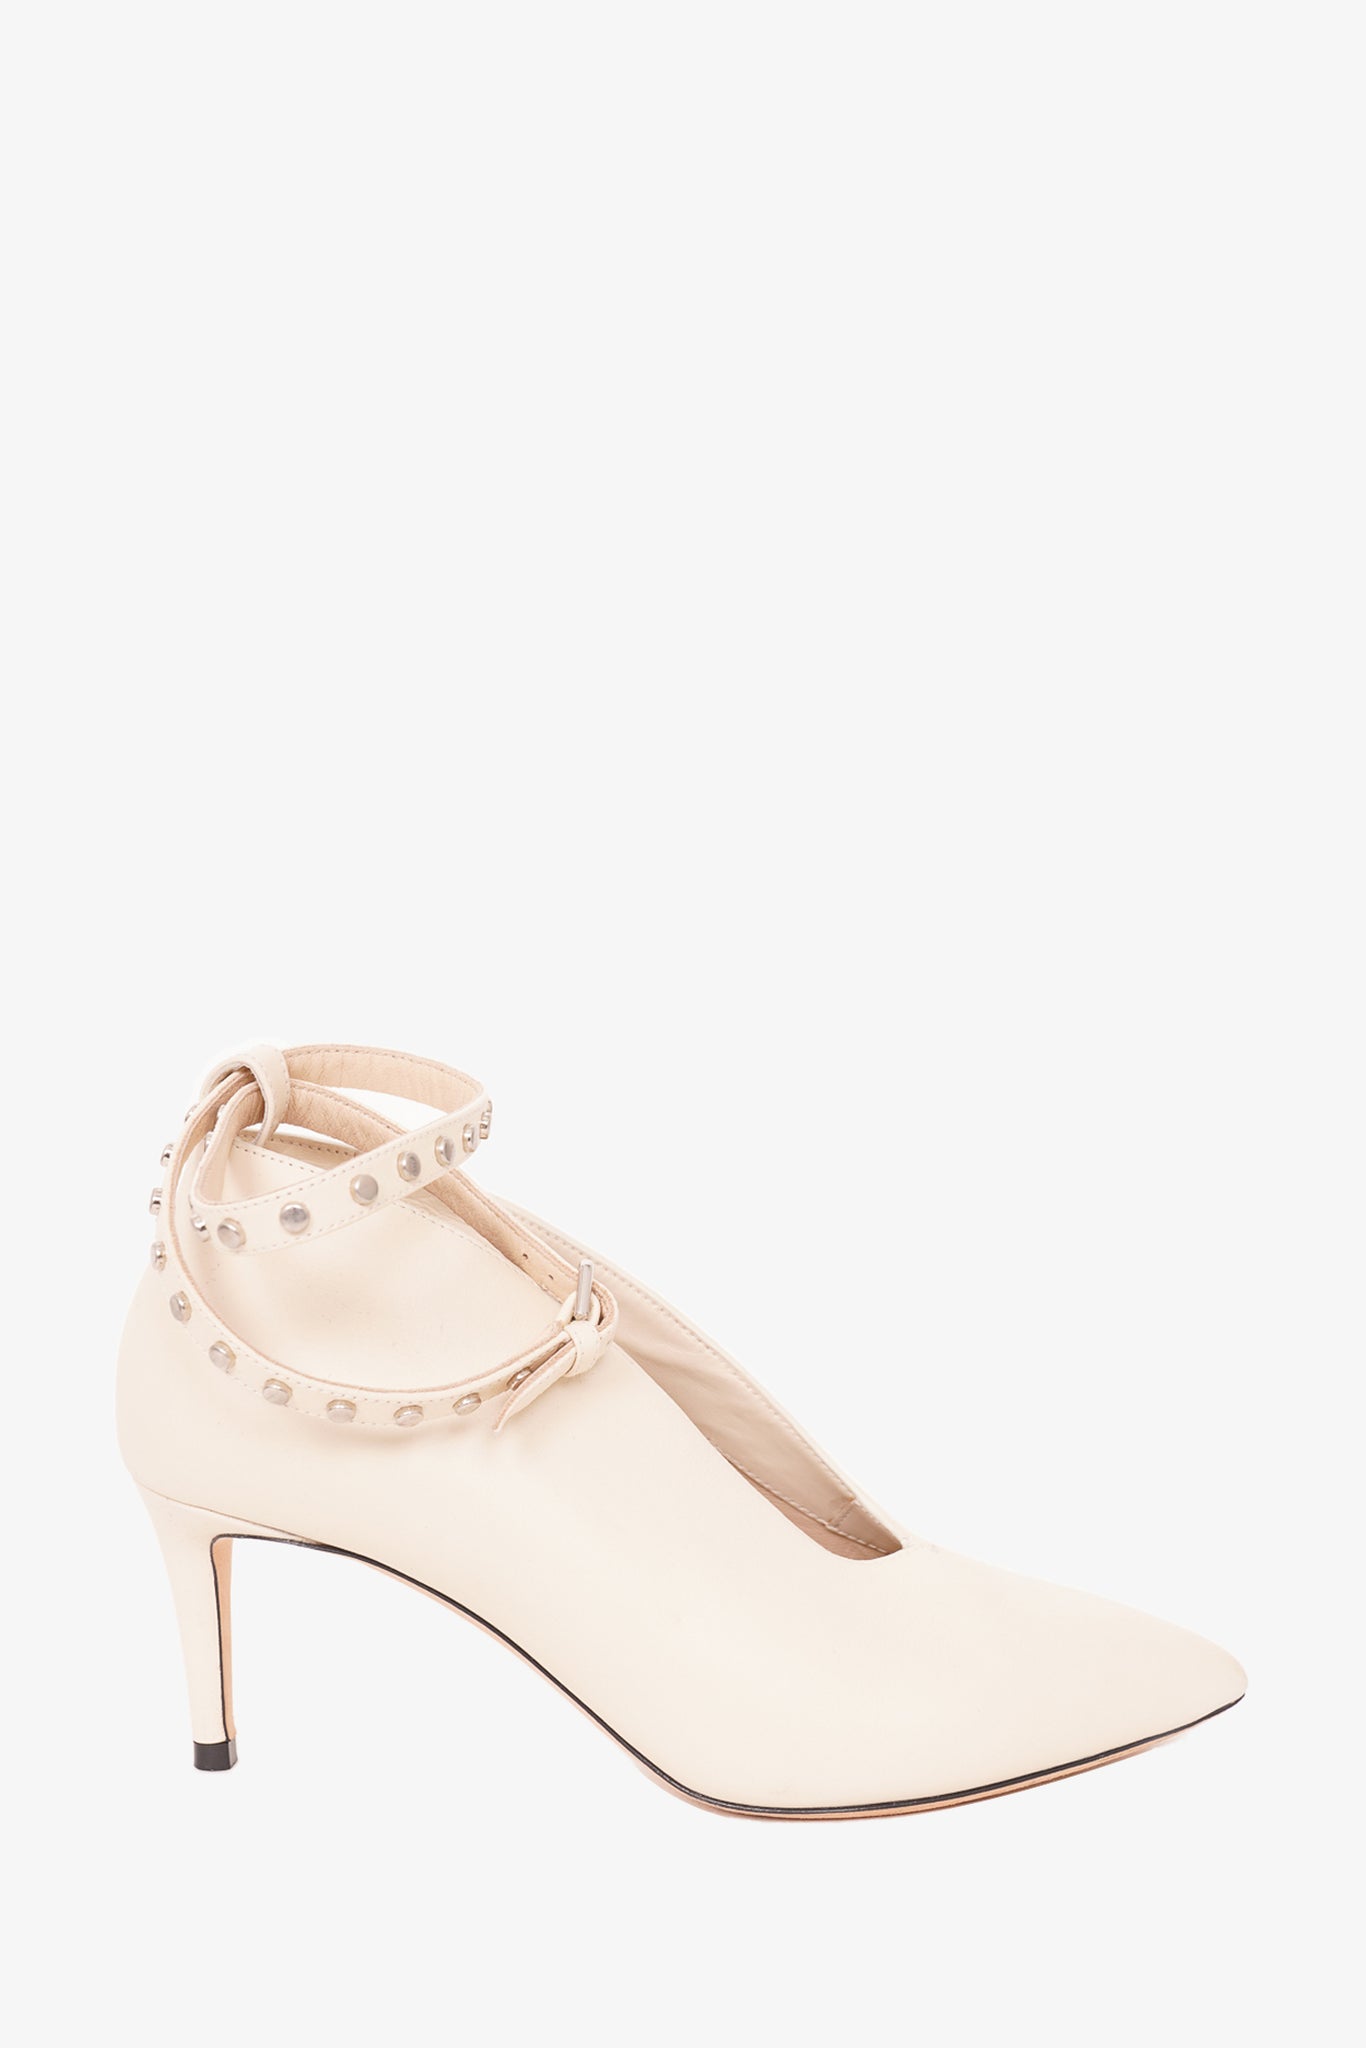 Jimmy Choo Cream Open Leather Ankle Bootie with Studs Size 36